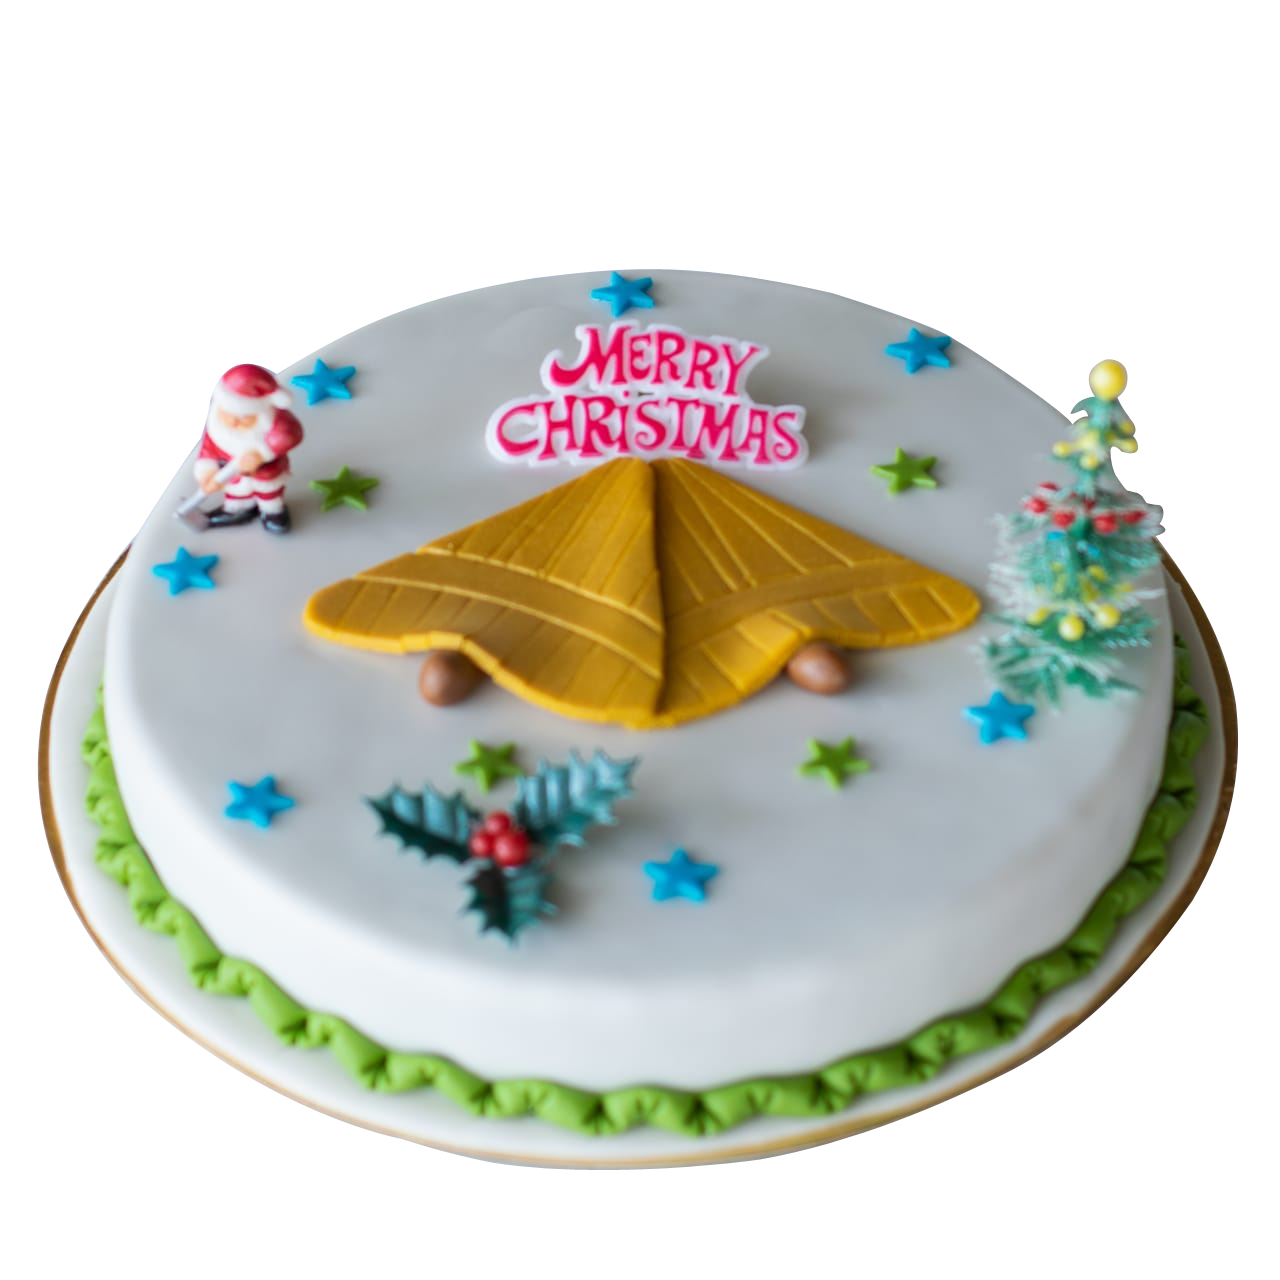 32 AWESOME Christmas cake decorating ideas %cur